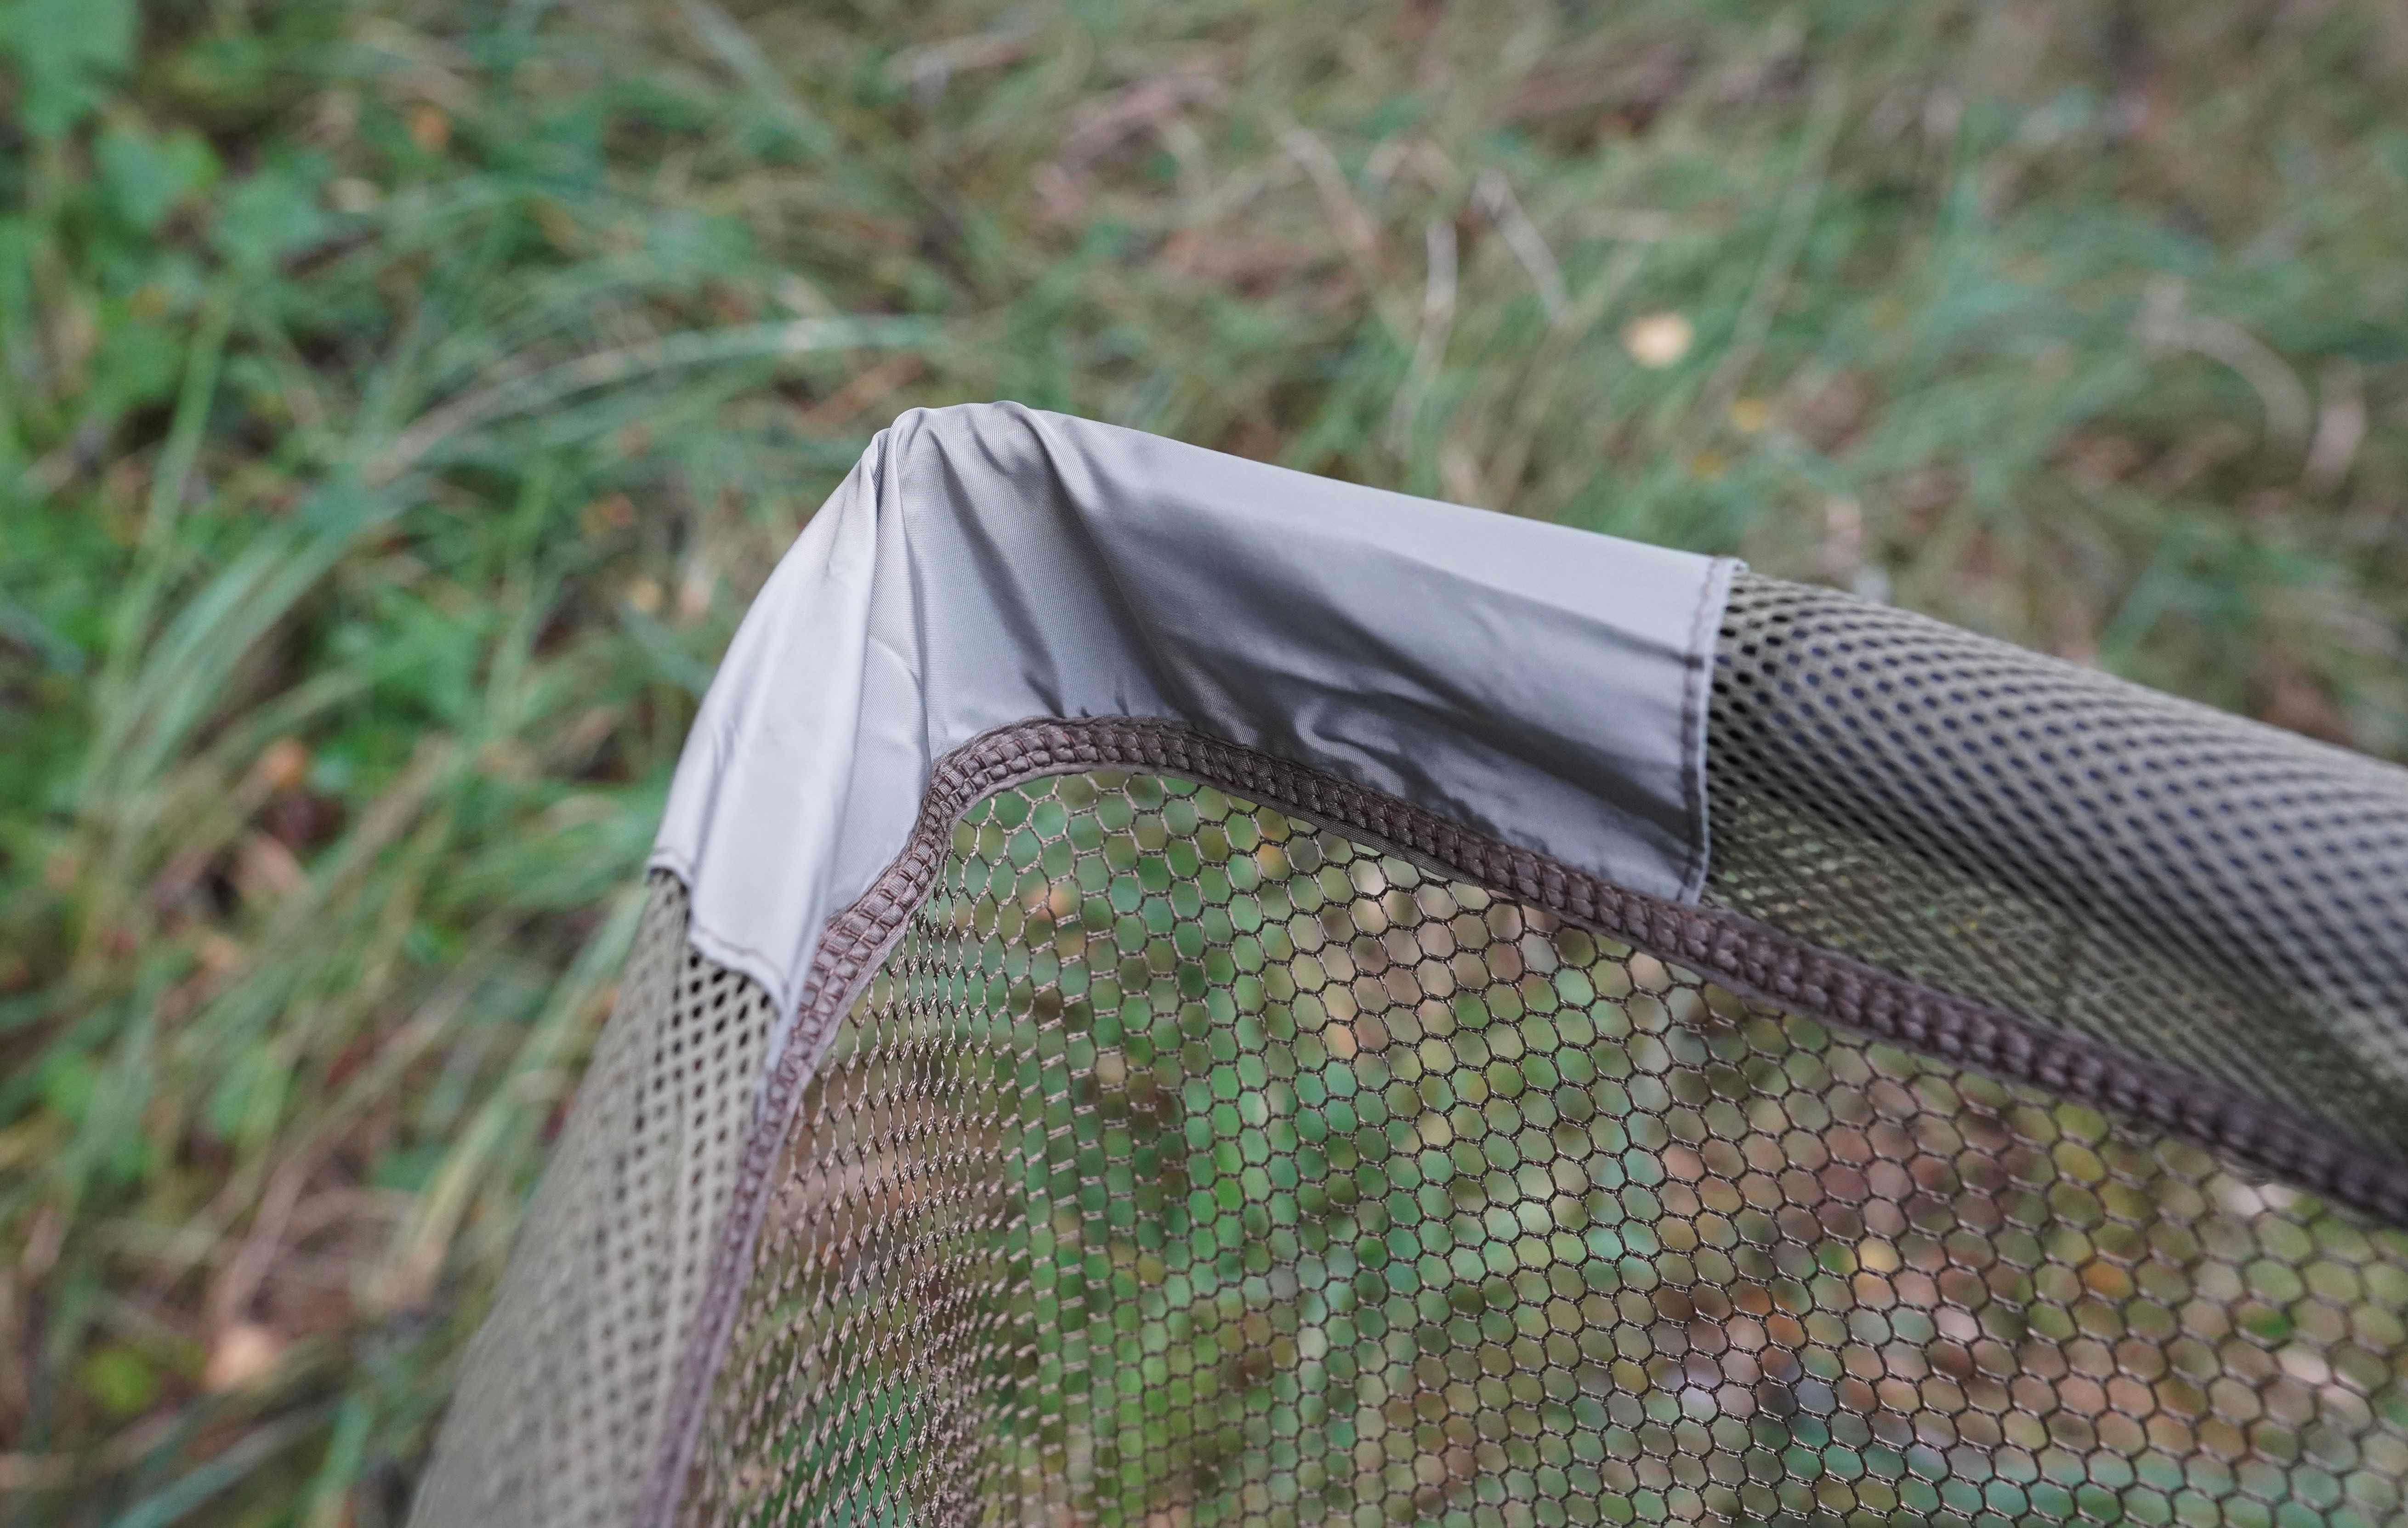 Forge Tackle Class Bx1 Landing Net